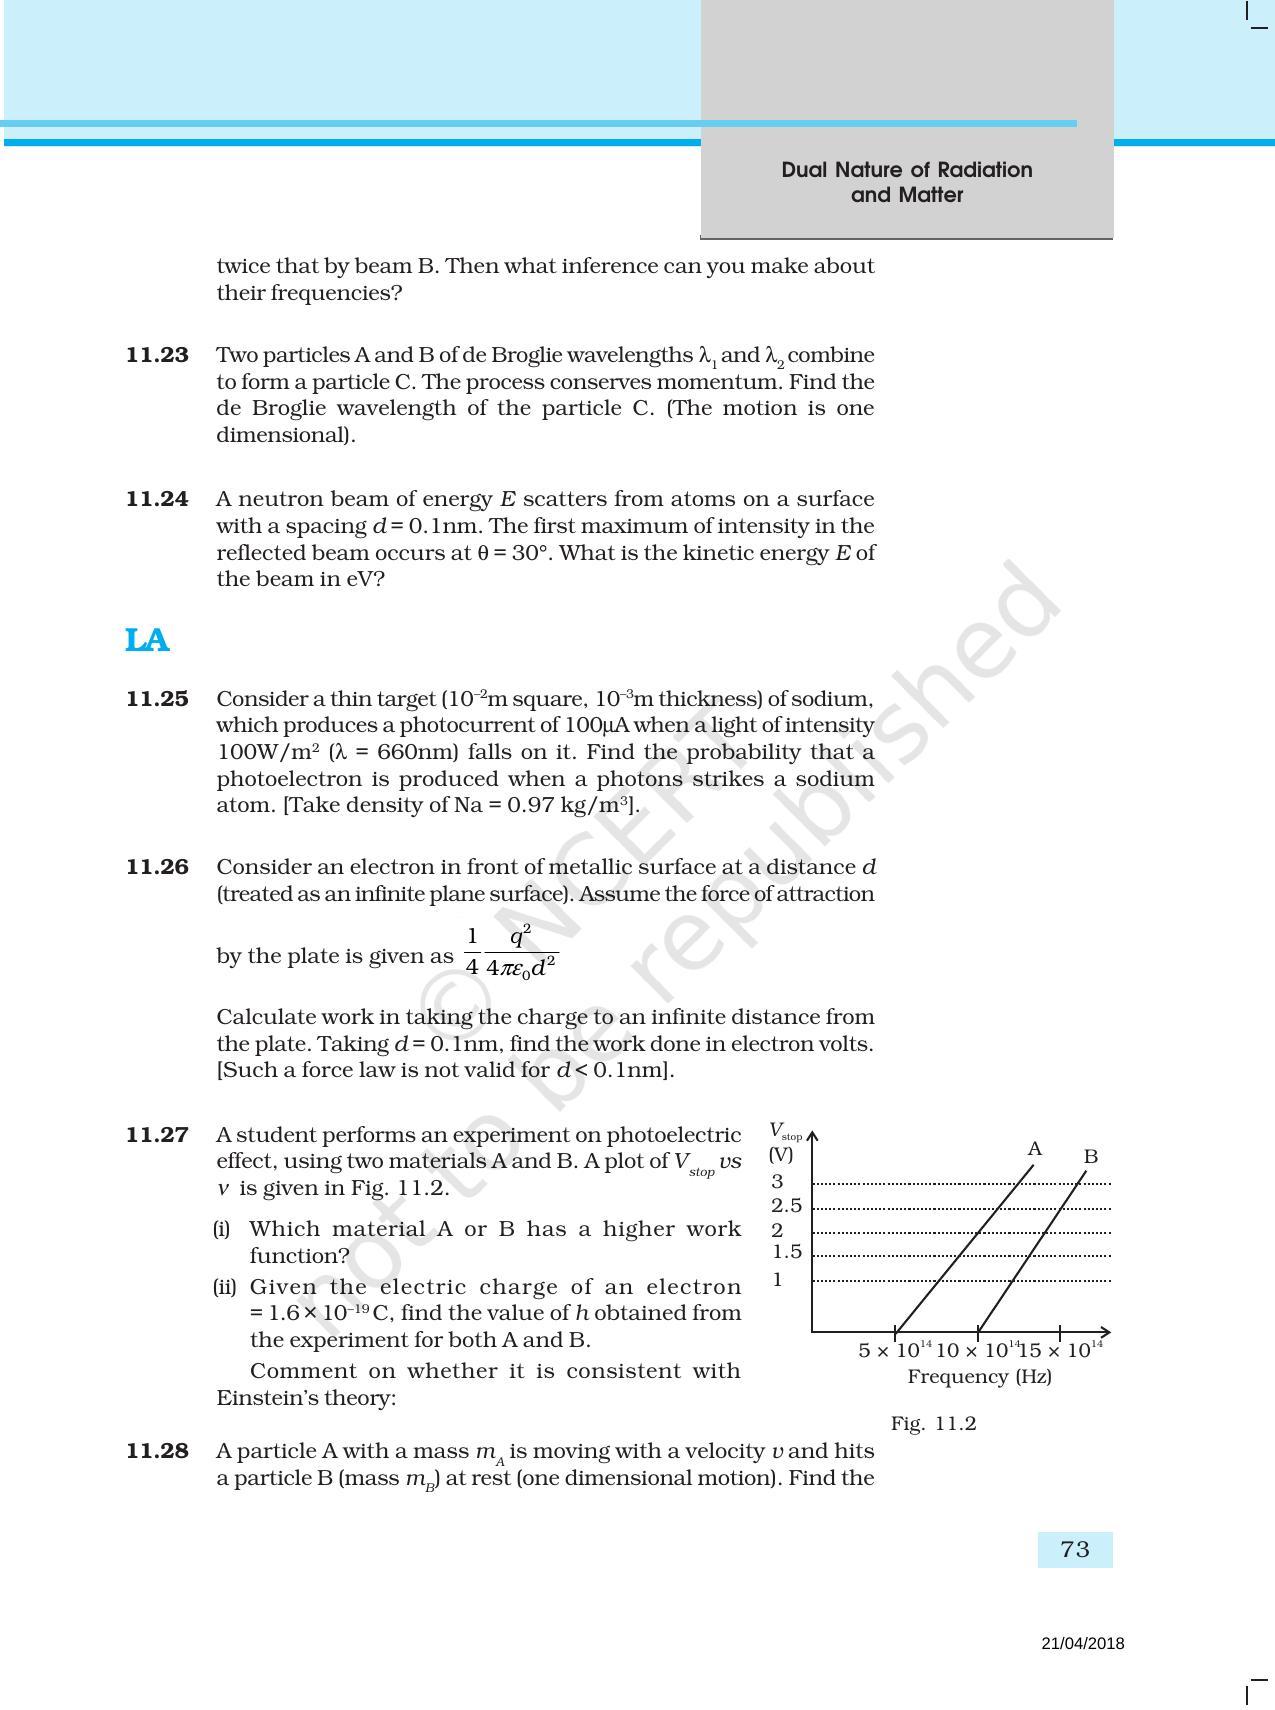 NCERT Exemplar Book for Class 12 Physics: Chapter 11 Dual Nature of Radiation and Matter - Page 6